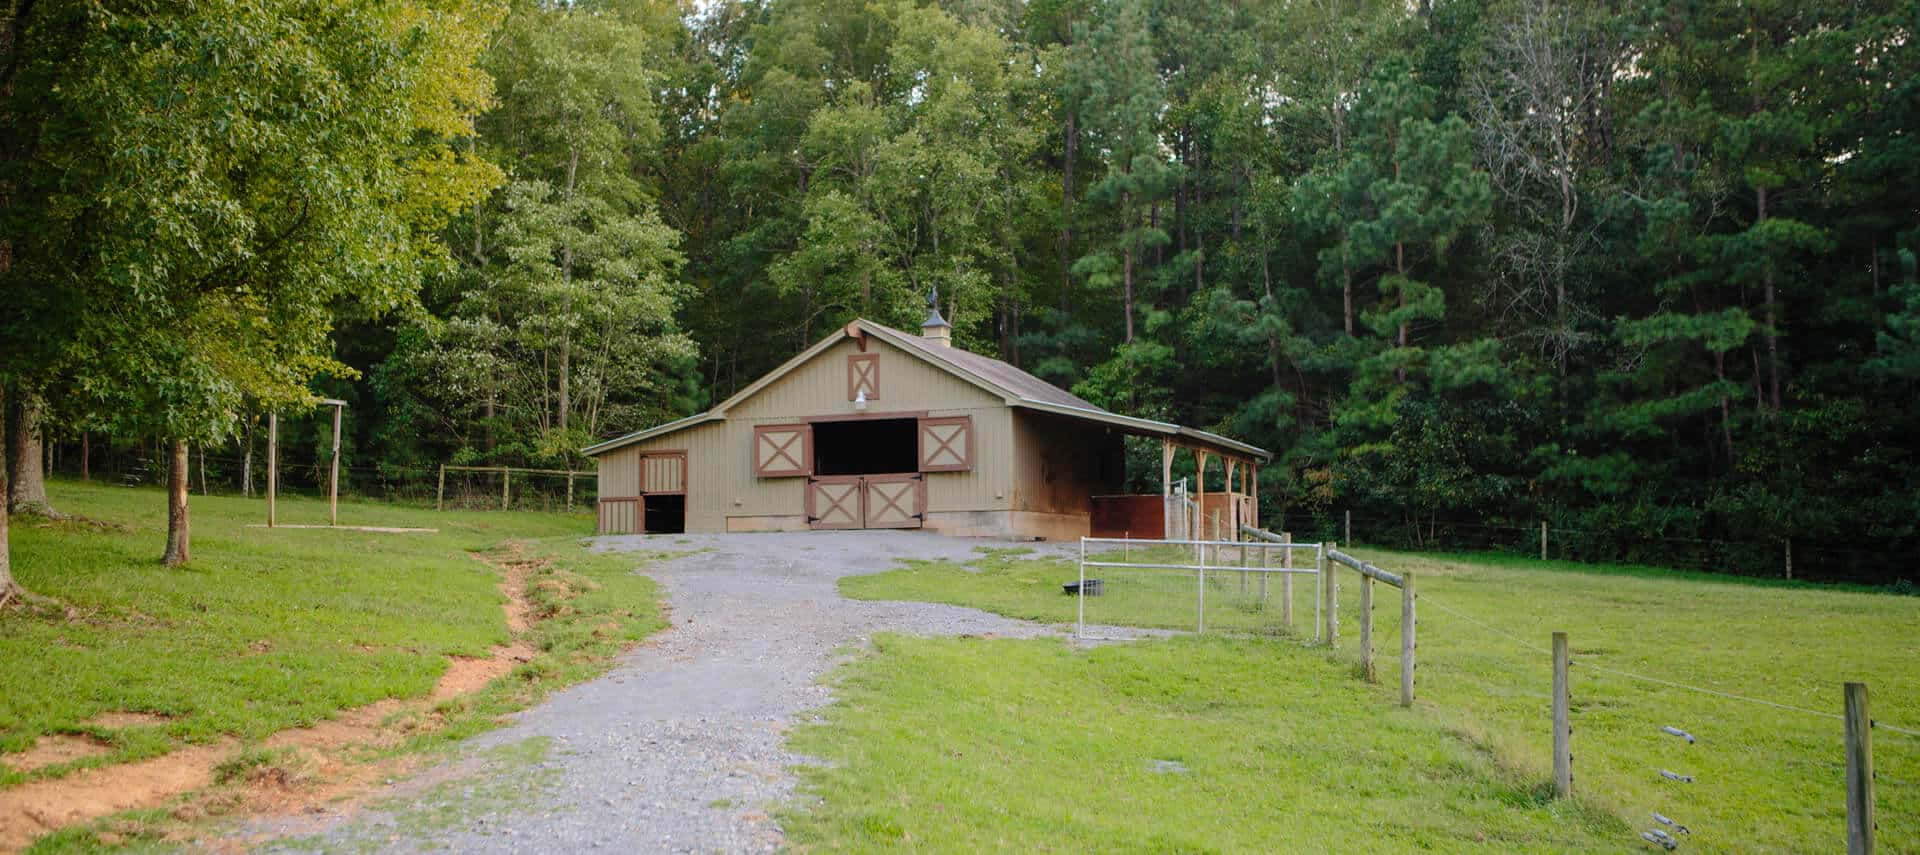 Brown horse barn with tan accents at the end of a gravel drive, set in a green pasture.